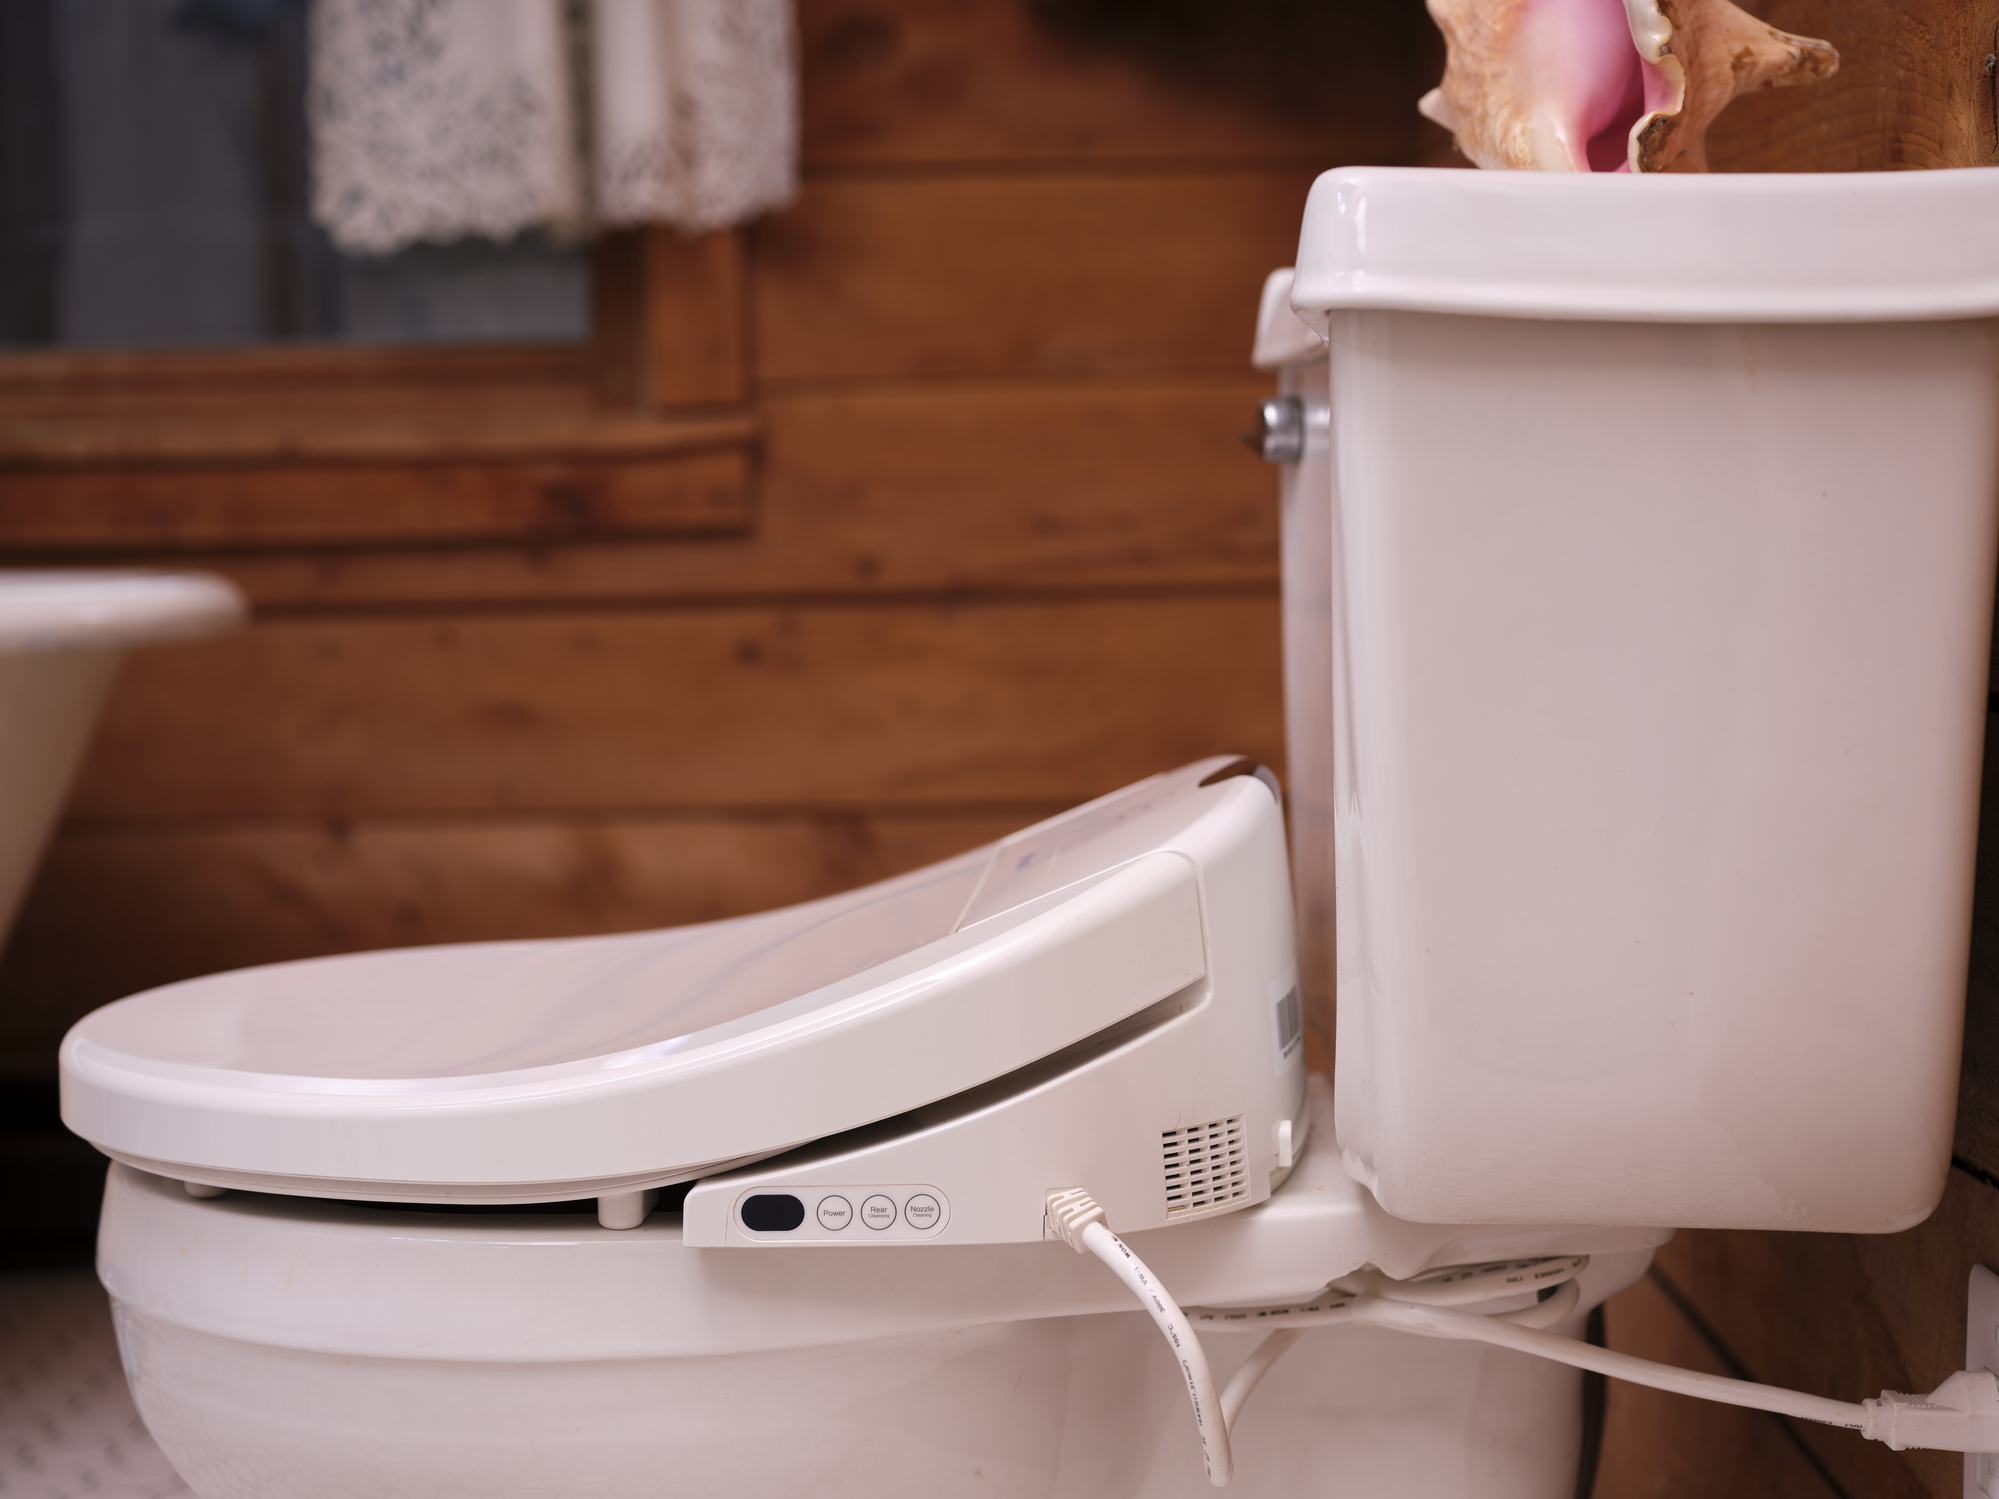 Bidet toilet seat with control panel, attached to a white toilet in a wooden-themed bathroom